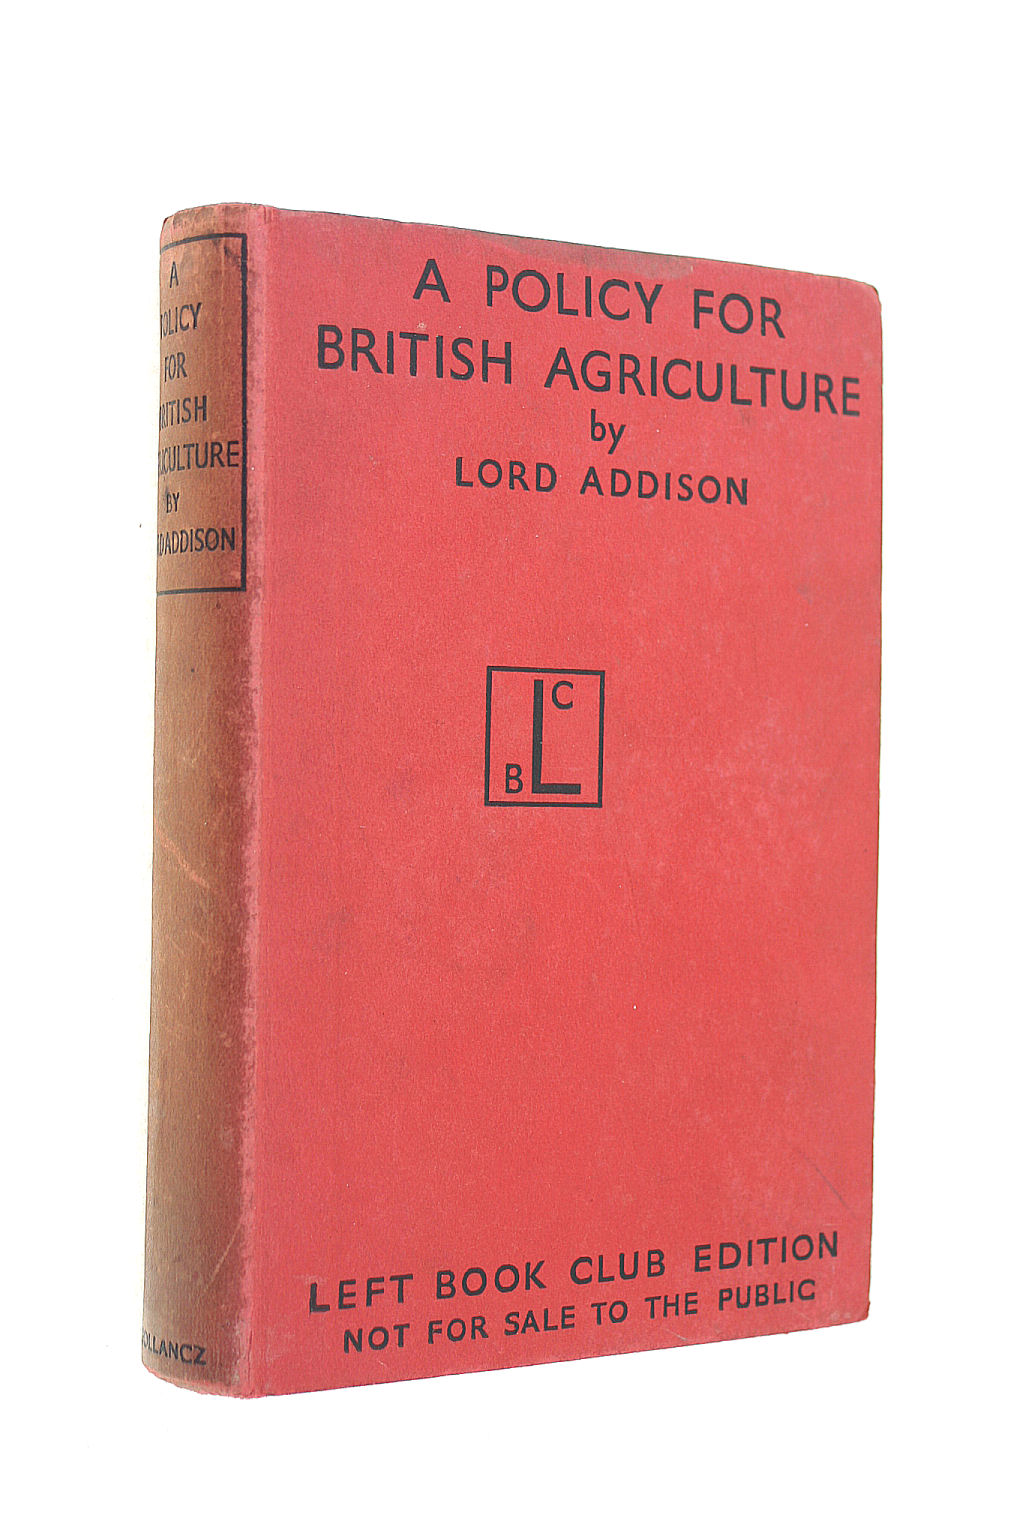 ADDISON, CHRISTOPHER ADDISON, 1ST VISCOUNT (1869-1951) - A Policy for British Agriculture / by the Rt. Honble. Lord Addison of Stallingborough